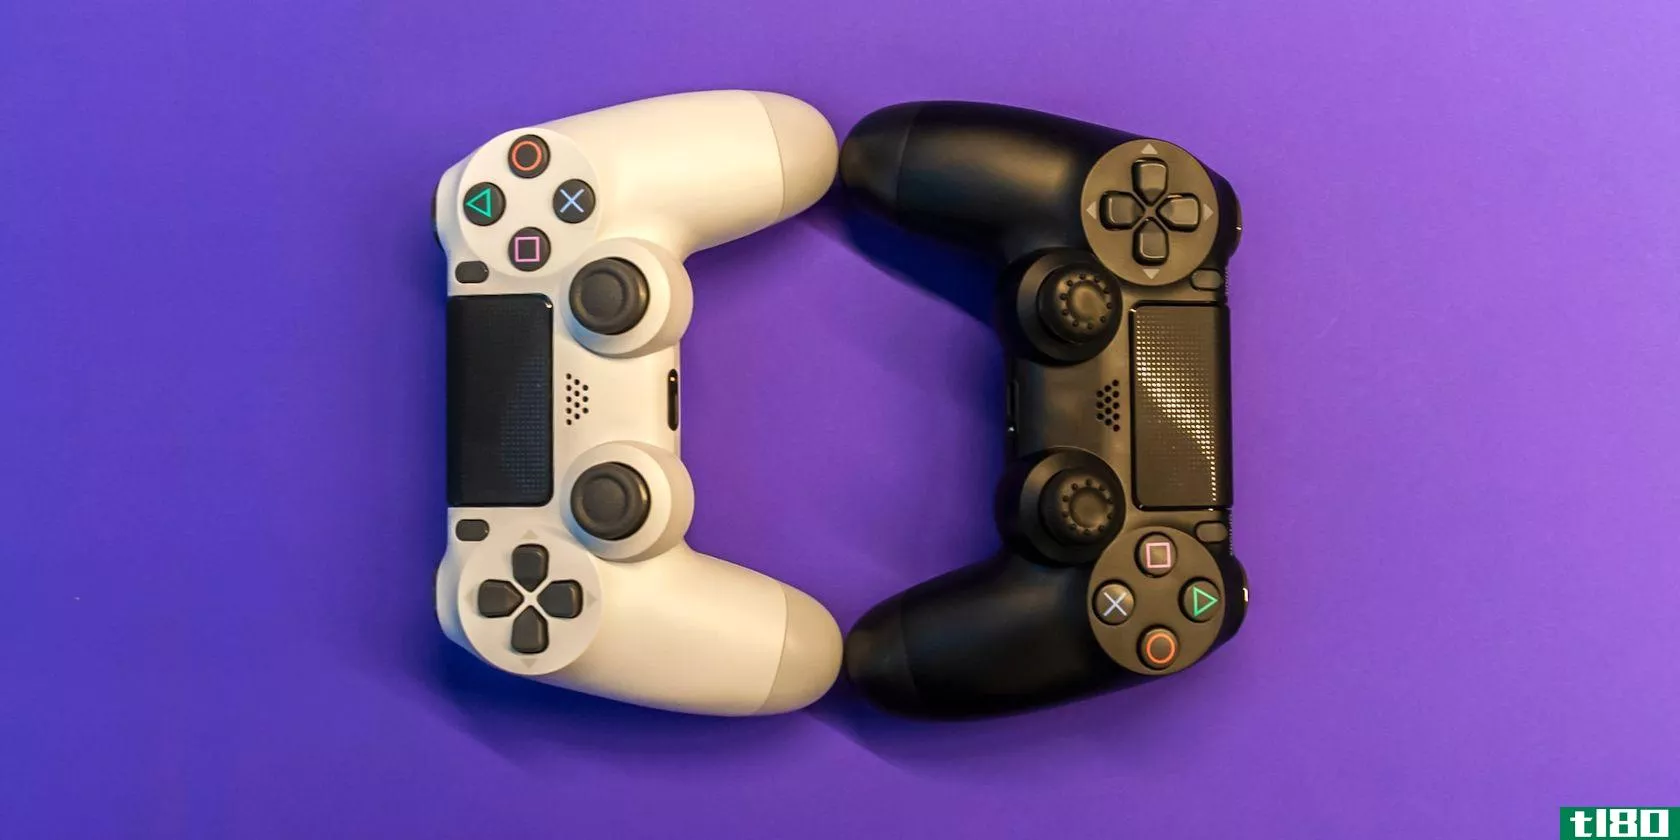 Two PlayStation C***ole Controllers